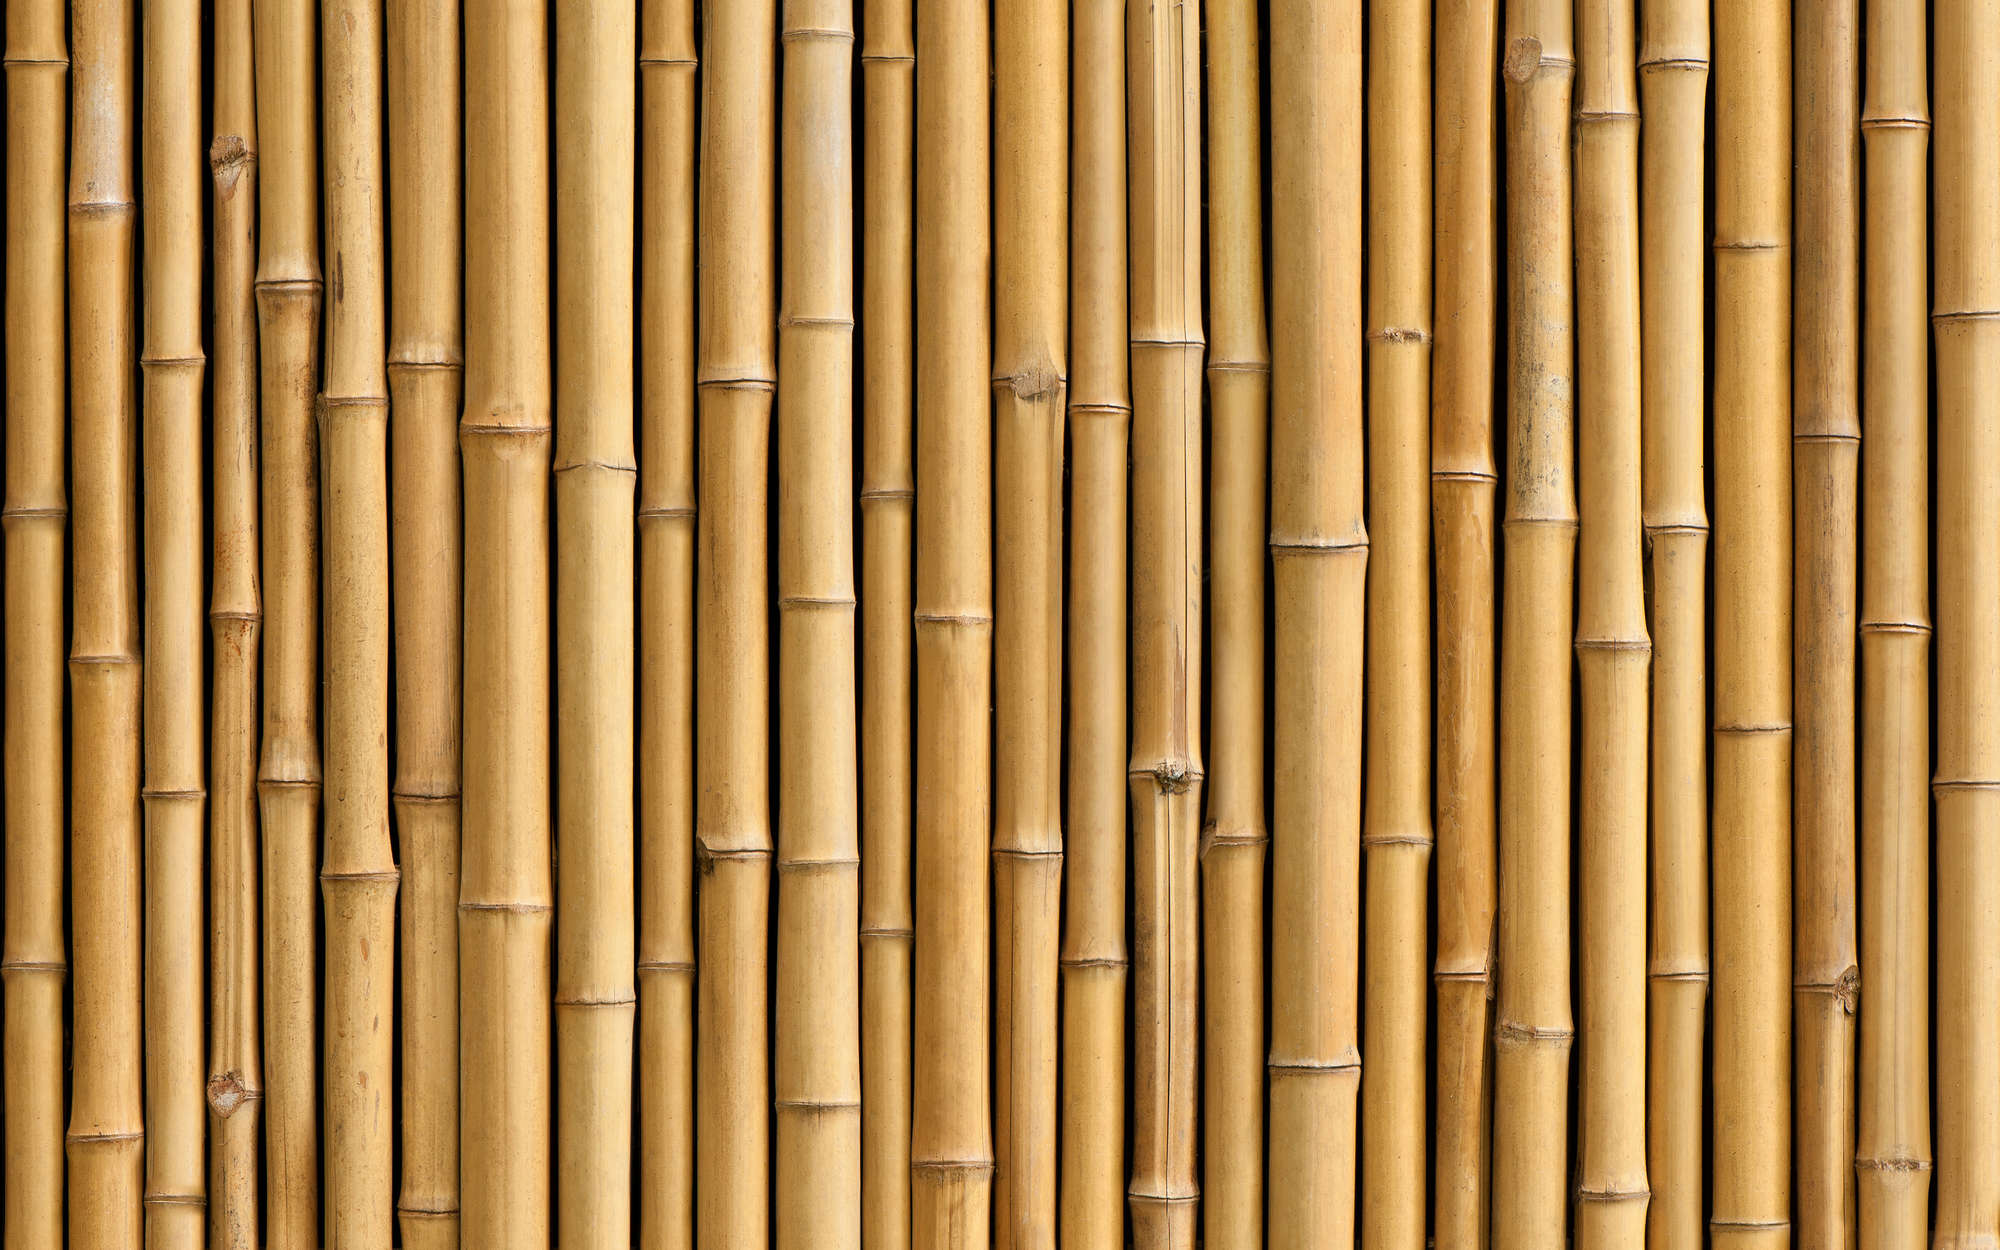             Bamboo Wall Mural in Beige - Premium Smooth Non-woven
        